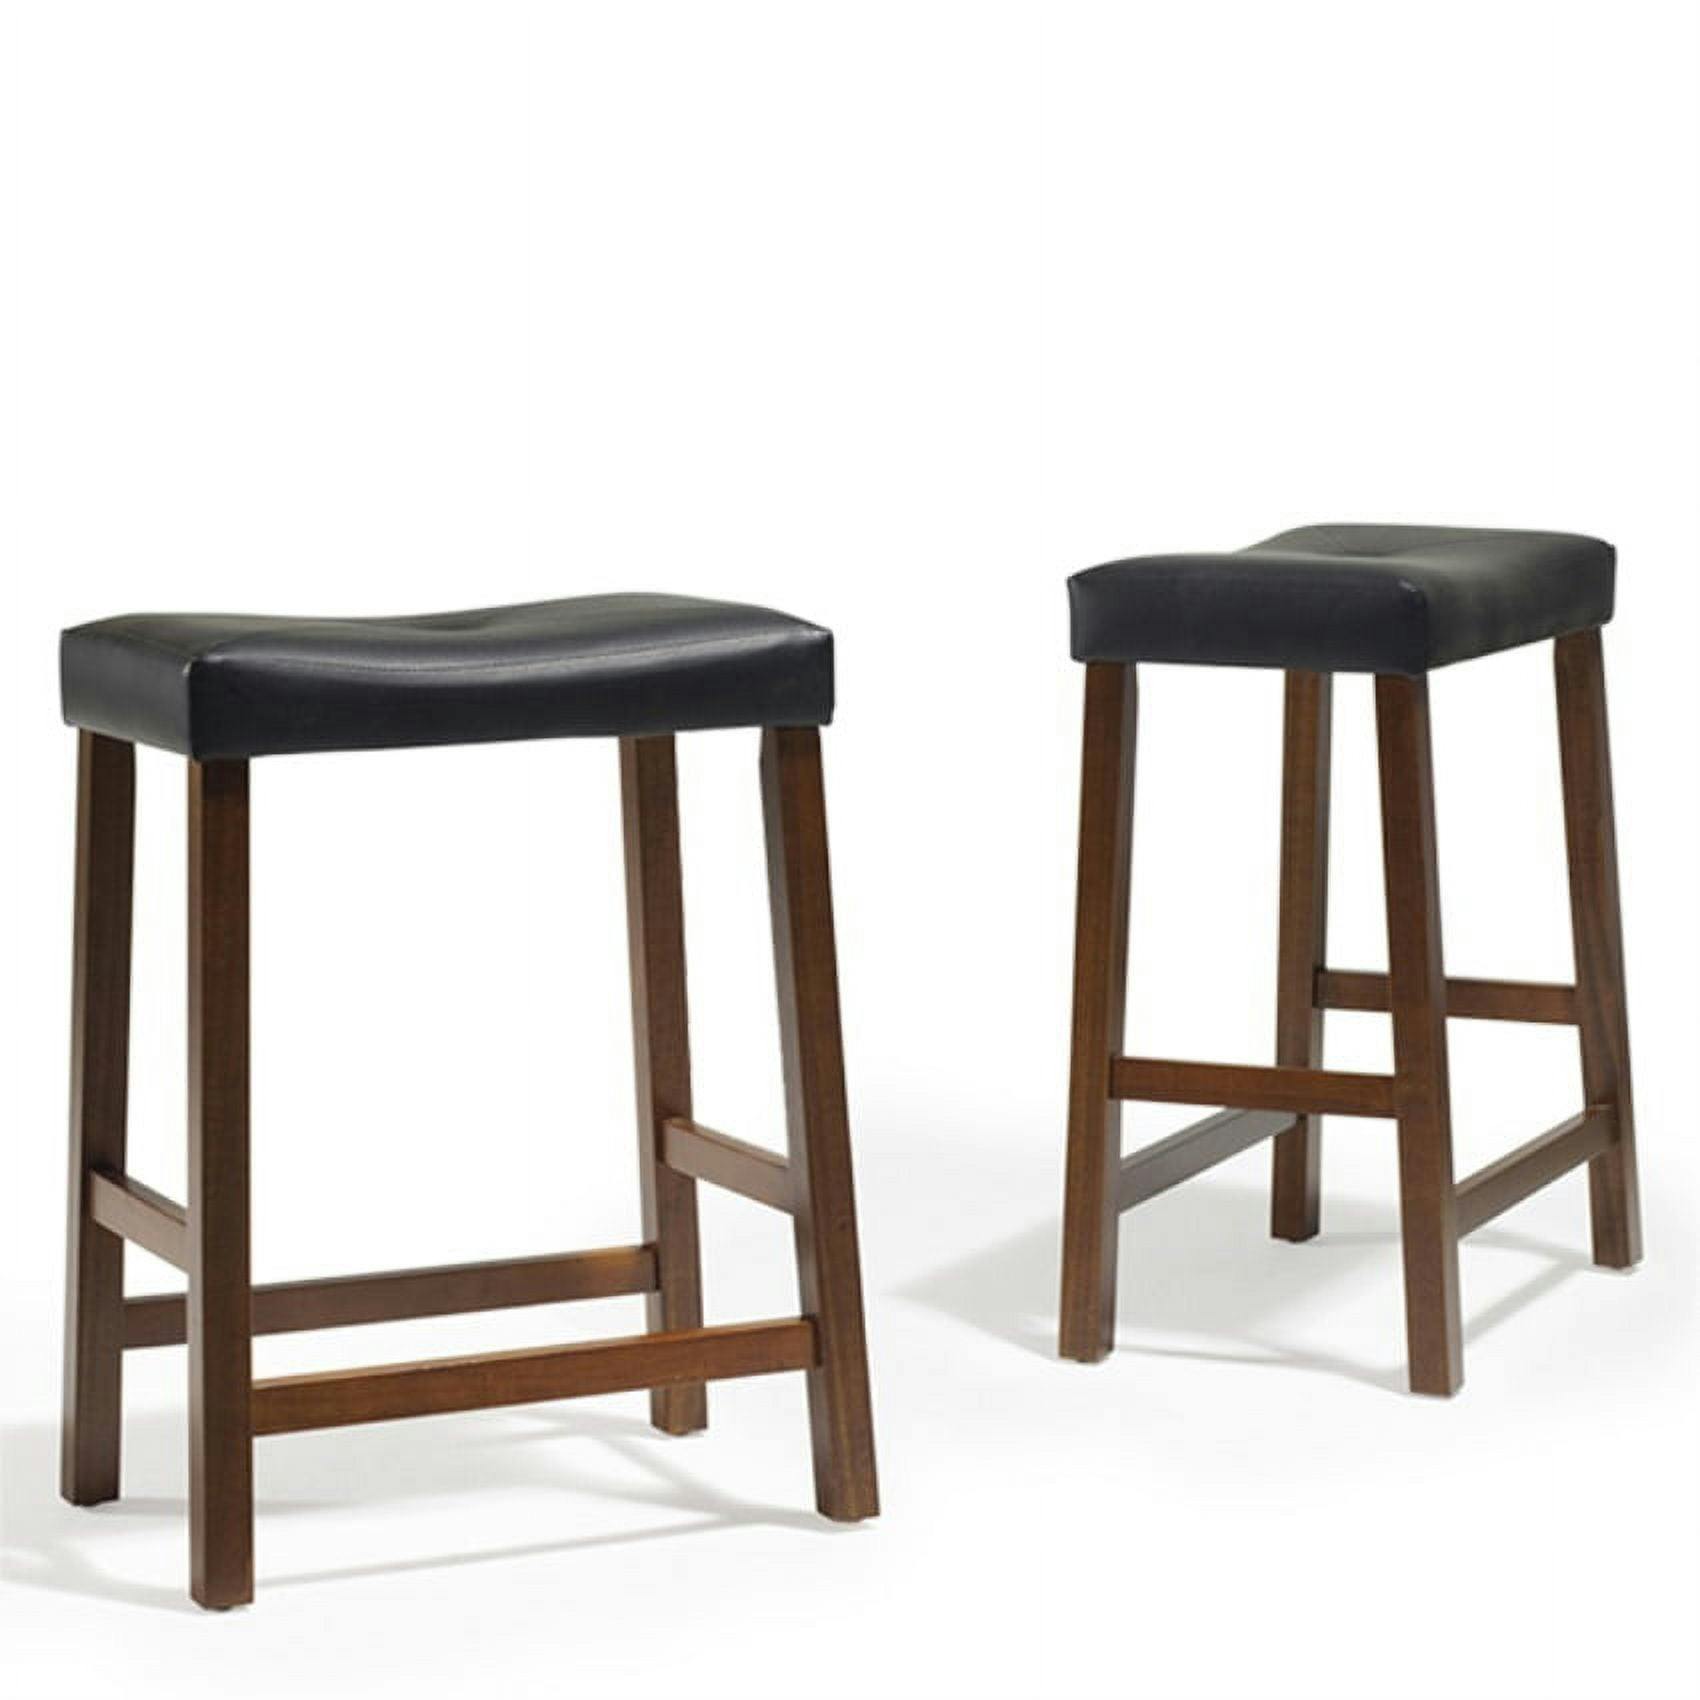 Classic Cherry 24" Backless Saddle-Style Wood & Leather Counter Stool